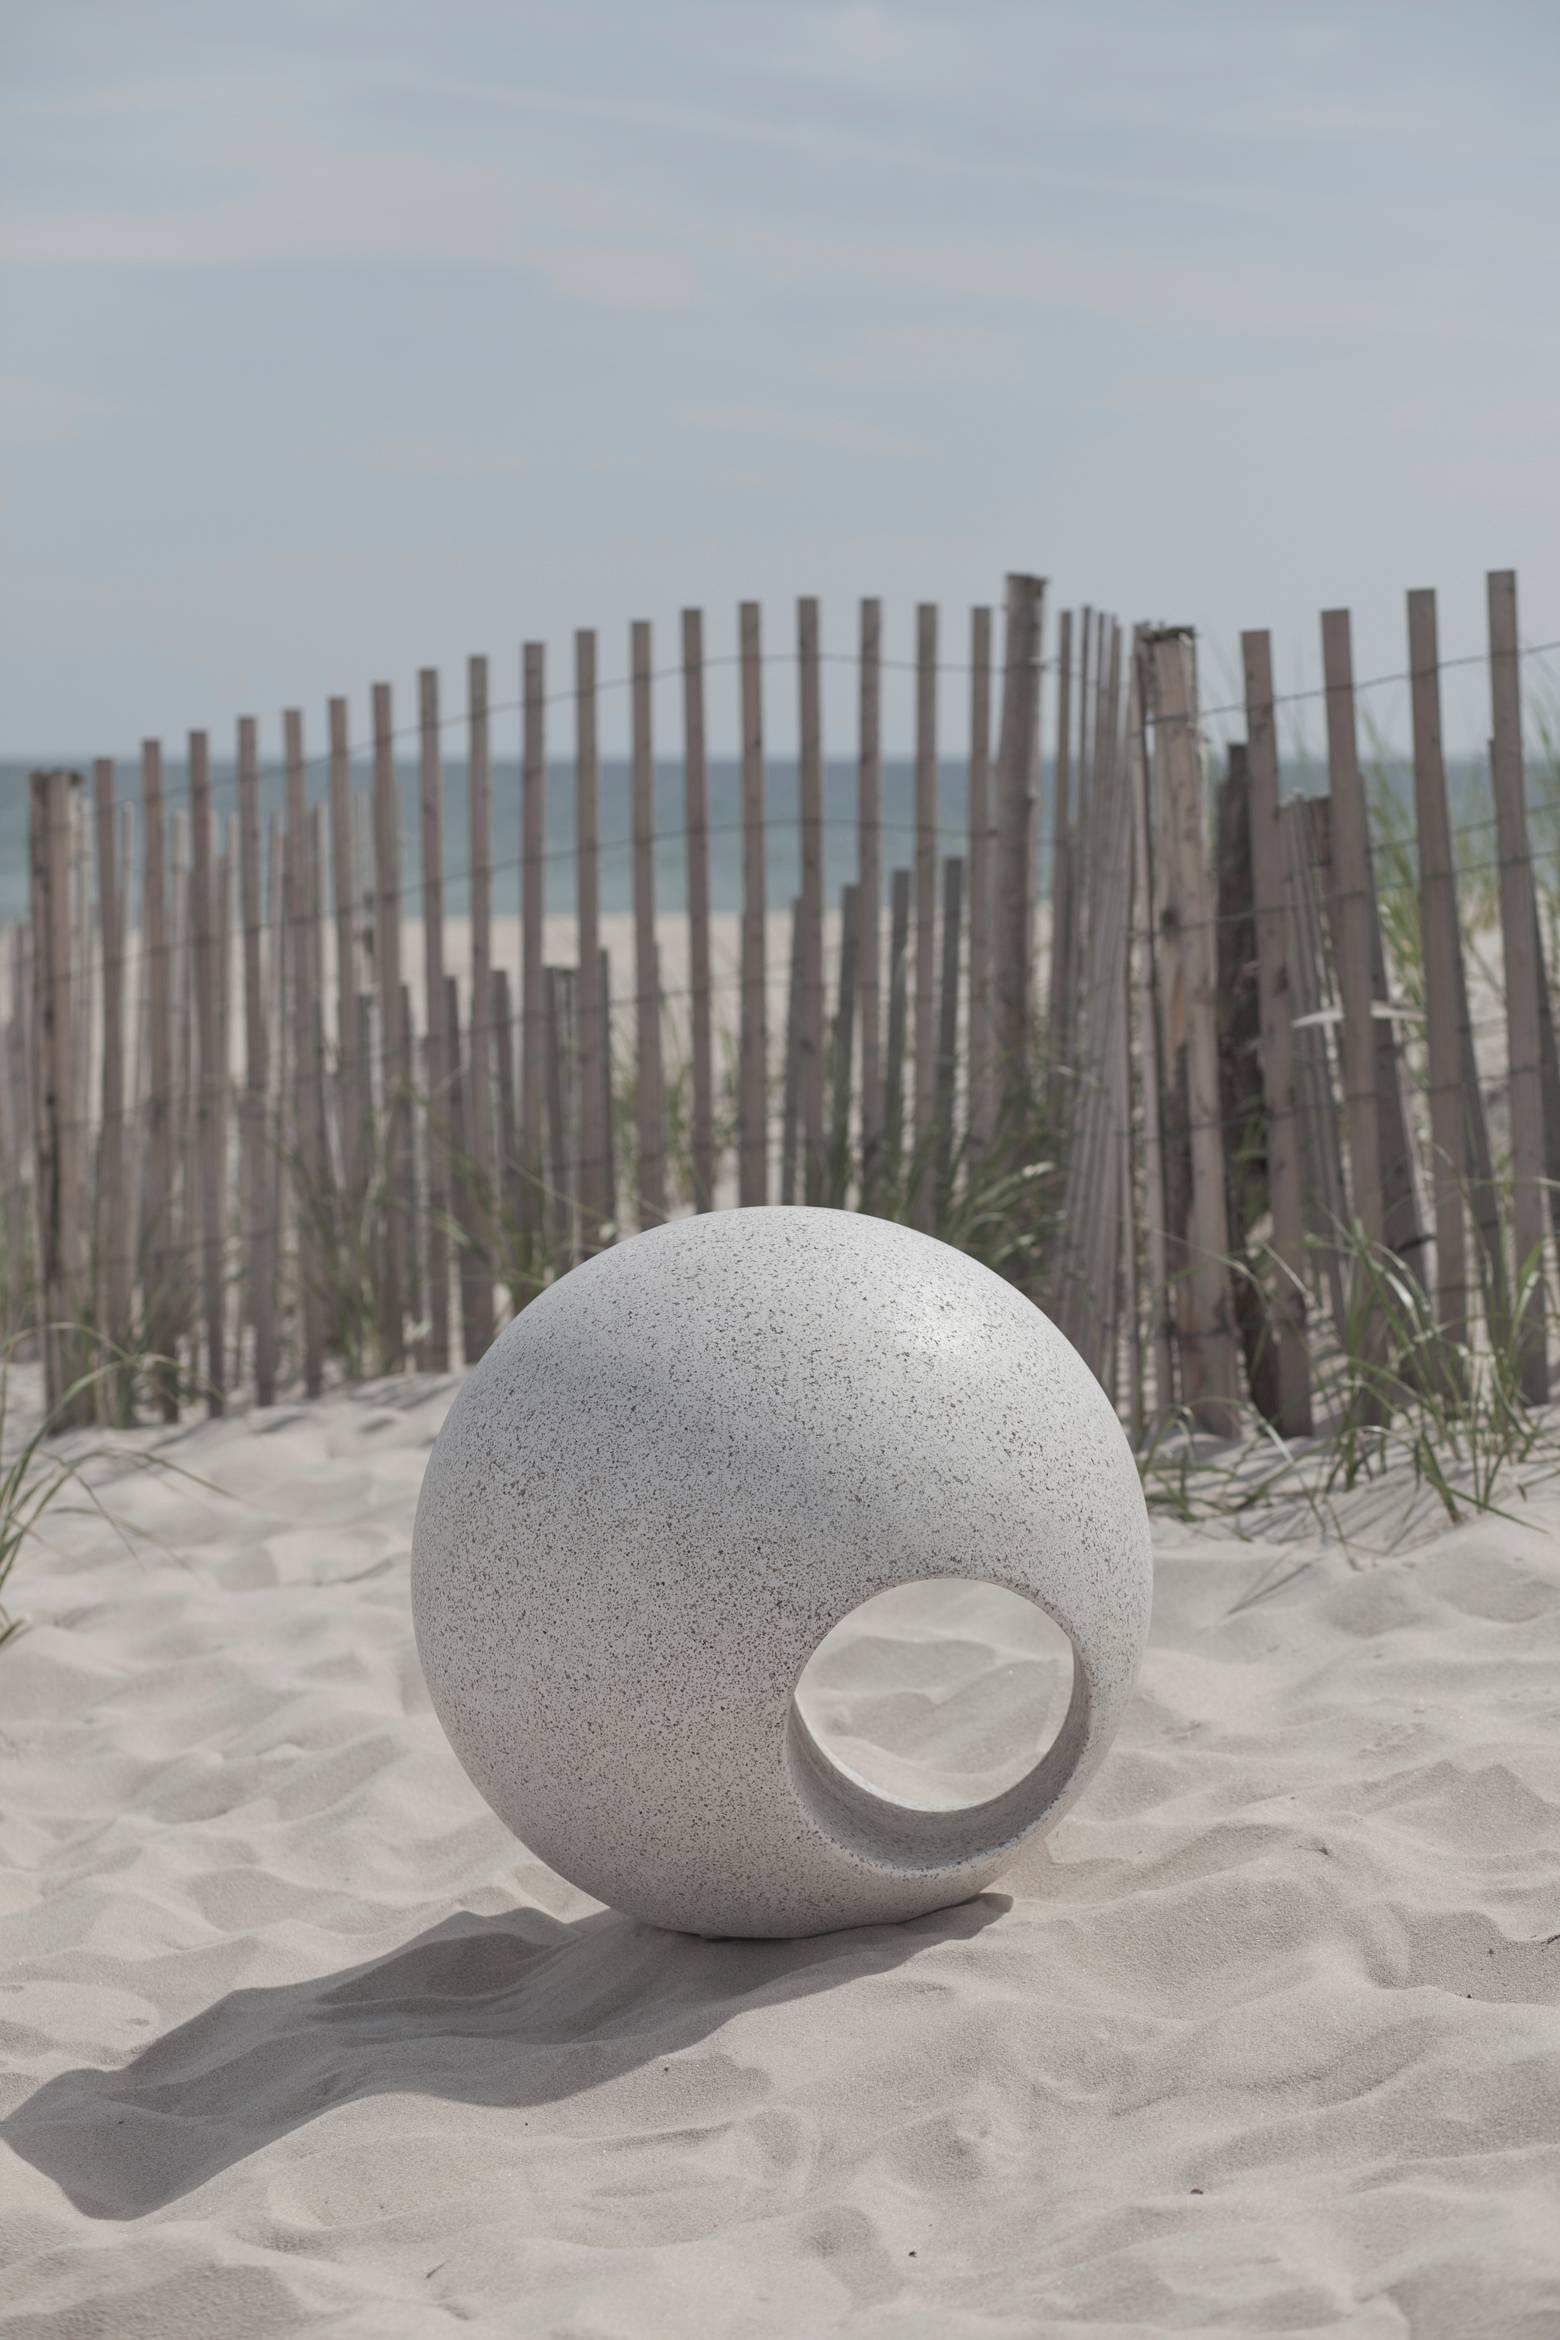 Outdoor Sphere is cast in fiberglass with stone aggregate to a look and feel like concrete or stone. This unique design is a beautiful addition to an outdoor space as a decorative sculpture or abstract seat. 

Item: Outdoor Sphere by May